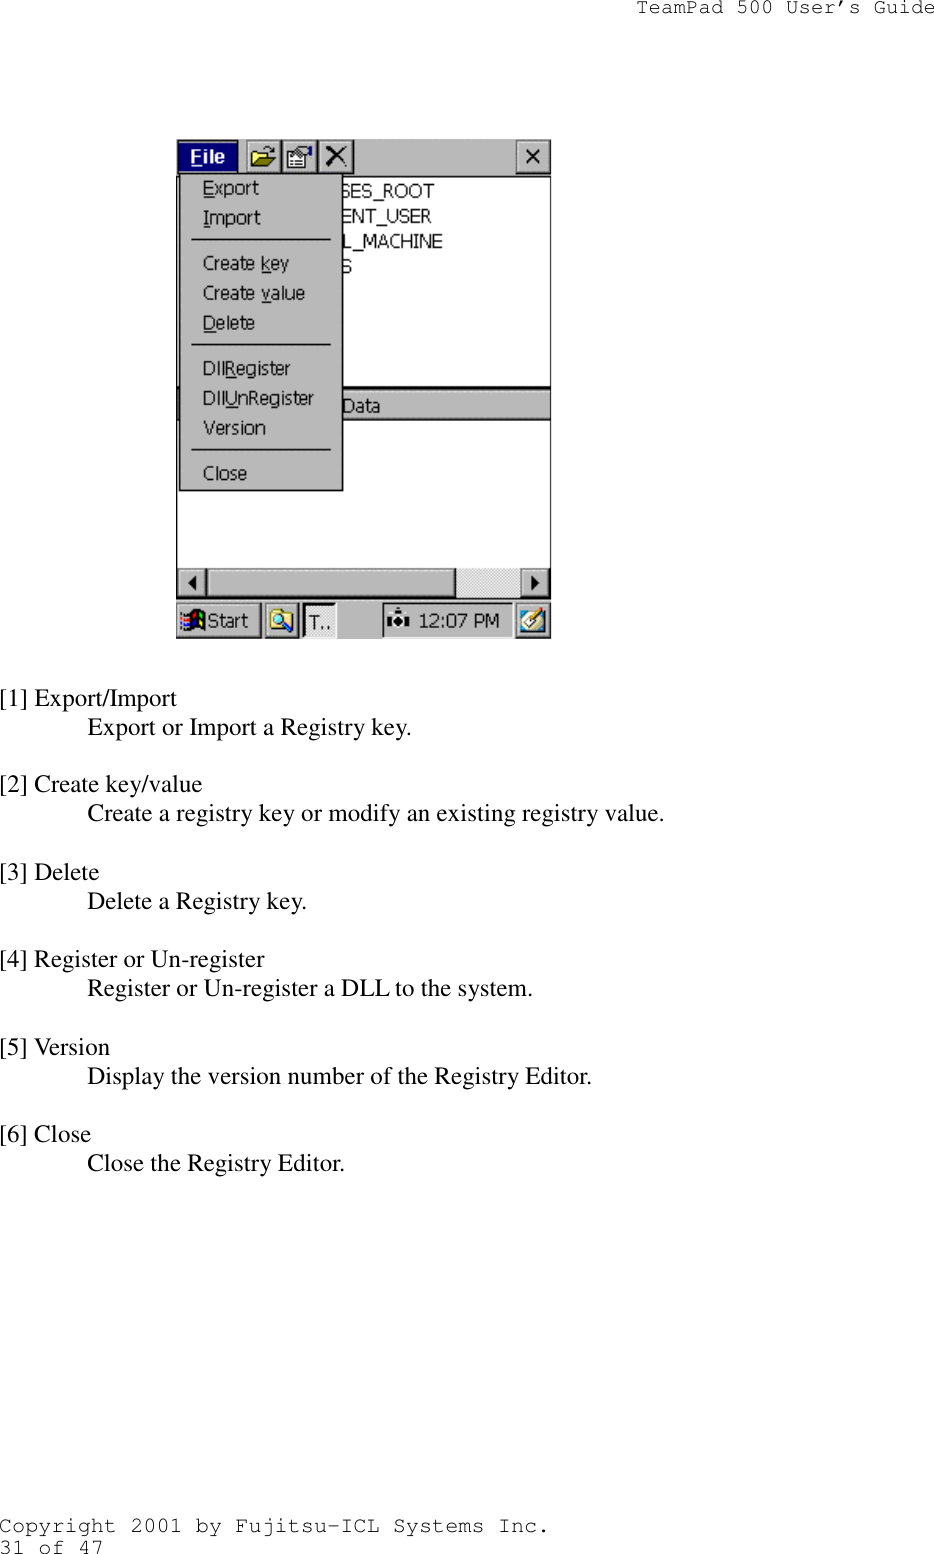                TeamPad 500 User’s GuideCopyright 2001 by Fujitsu-ICL Systems Inc.31 of 47          [1] Export/ImportExport or Import a Registry key.[2] Create key/valueCreate a registry key or modify an existing registry value.[3] DeleteDelete a Registry key.[4] Register or Un-registerRegister or Un-register a DLL to the system.[5] VersionDisplay the version number of the Registry Editor.[6] CloseClose the Registry Editor.